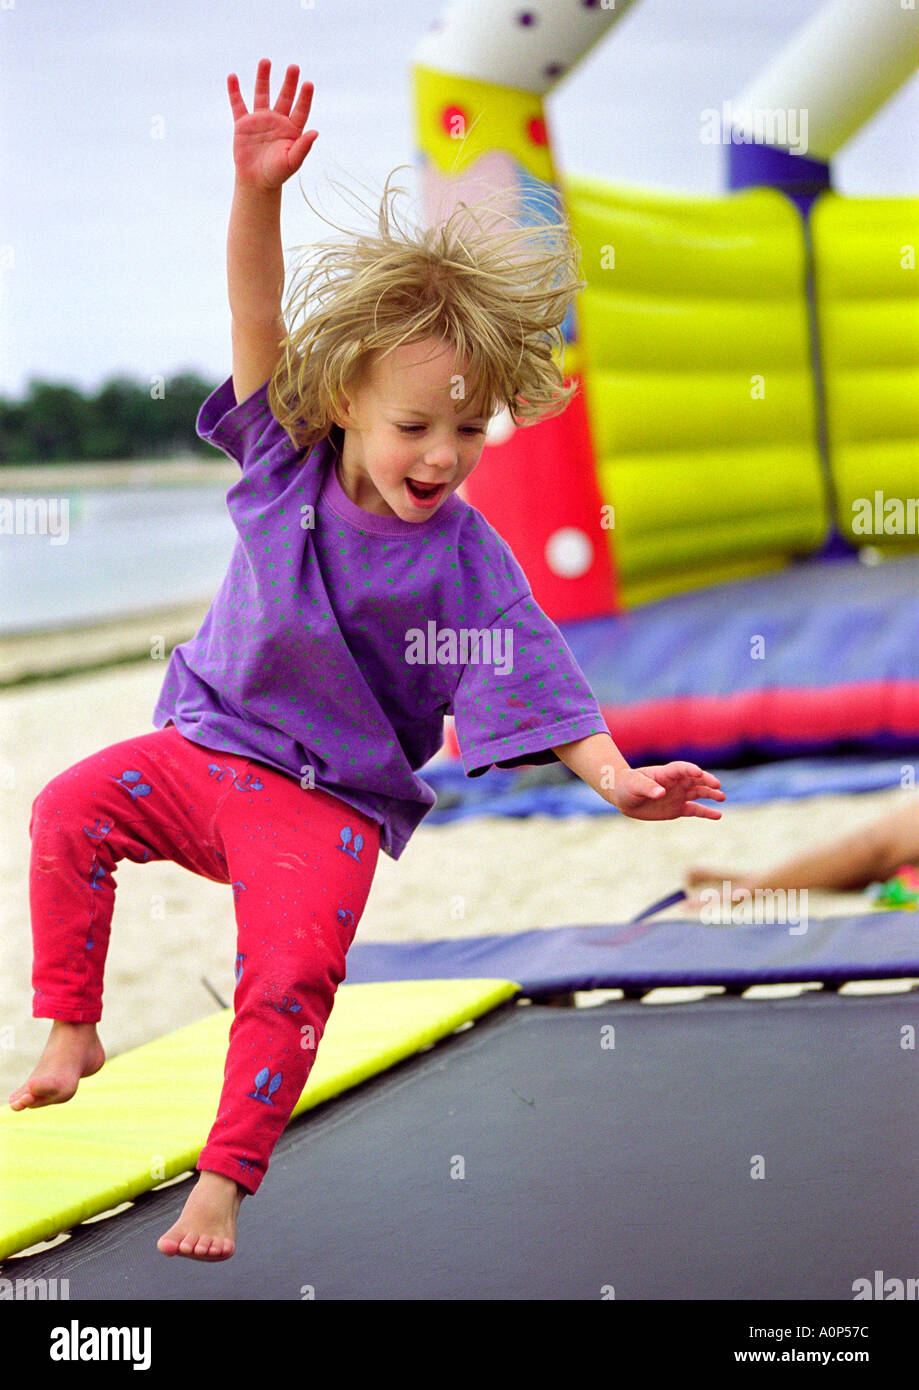 colourful and energetic image of young child up in the air, jumping on a  trampoline Stock Photo - Alamy